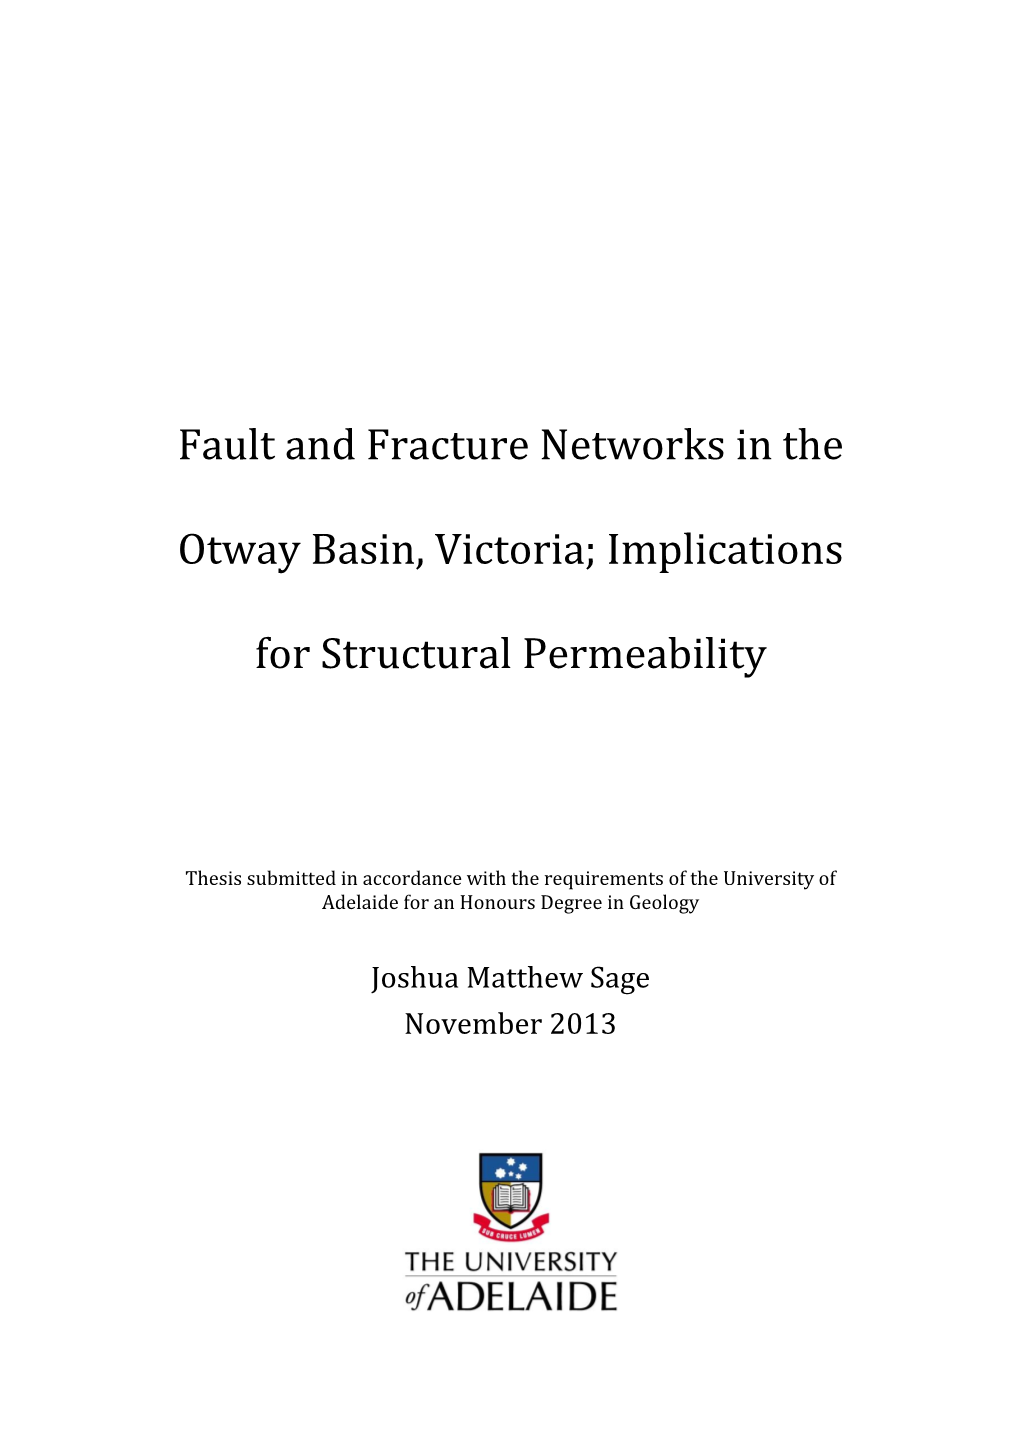 Otway Basin, Structural Permeability, Eumeralla Formation, Fracture Mechanics, Fault